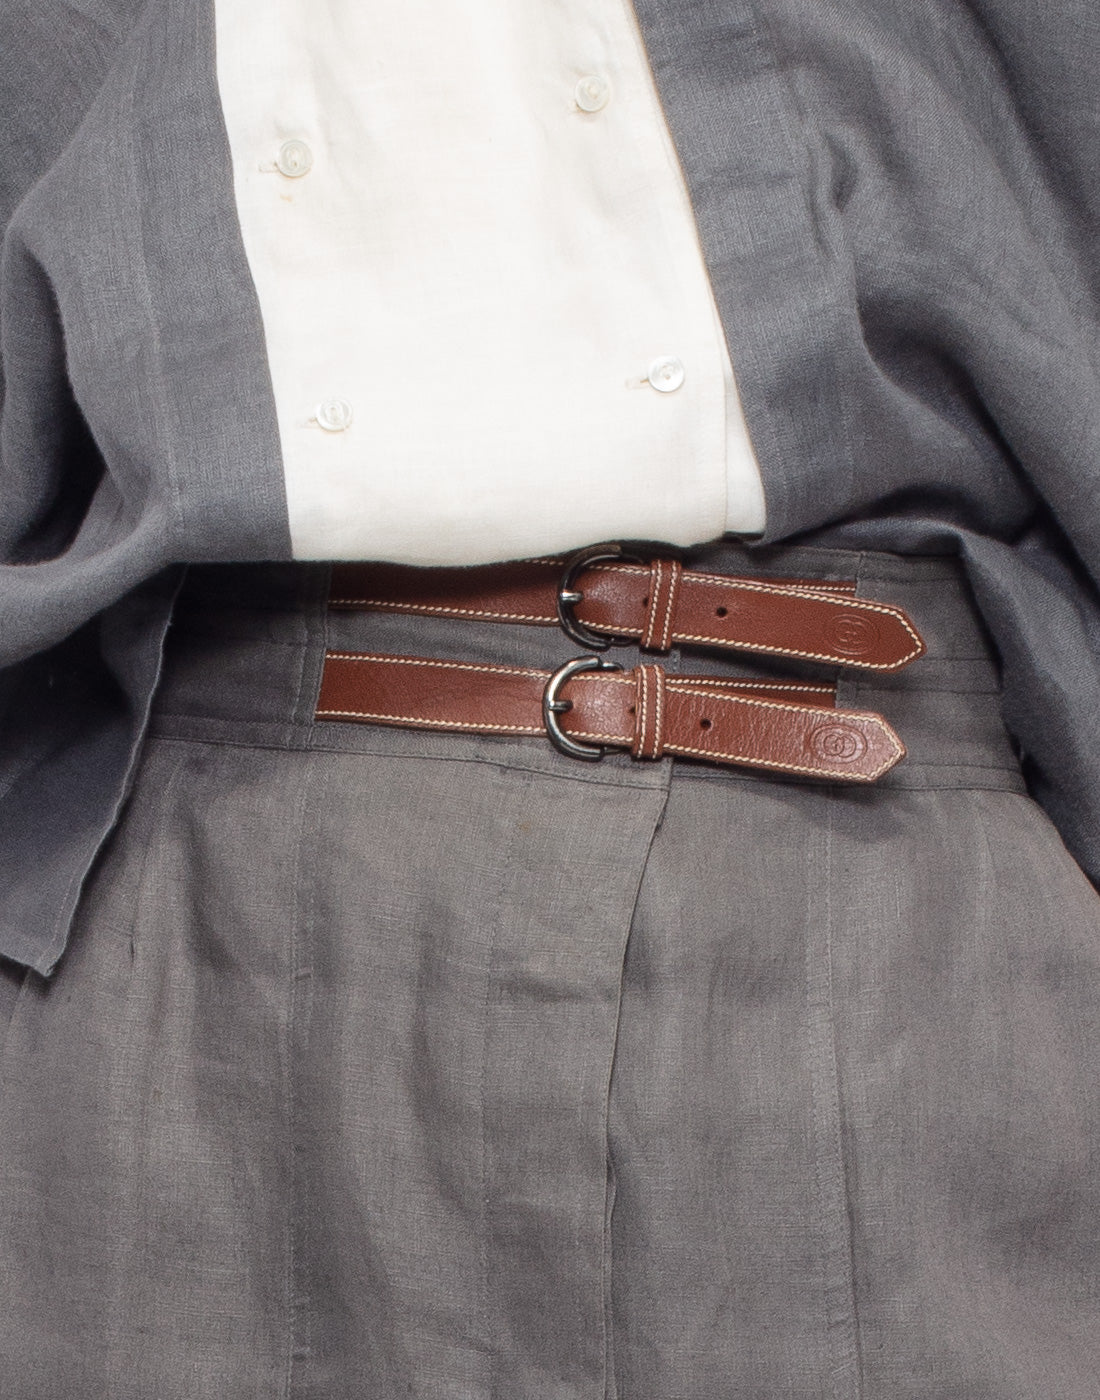 High-waisted gray linen skirt with leather belt as an insert from Gucci archives